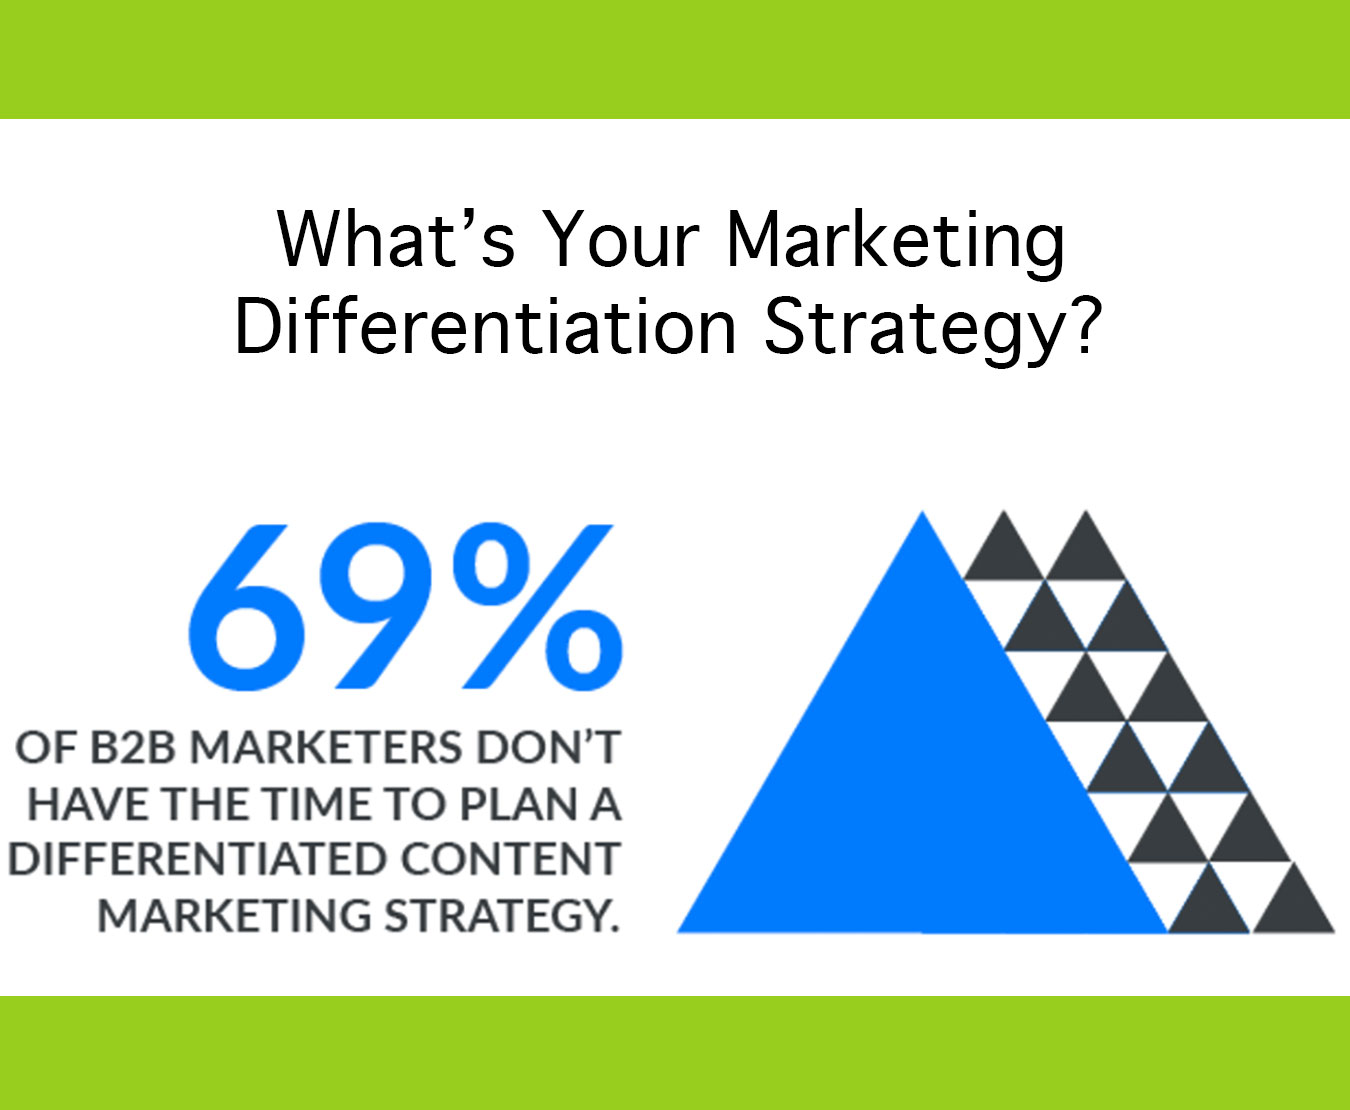 manufacturing marketing differentiation strategy takes the back seat as 69% of marketers say they don't have time